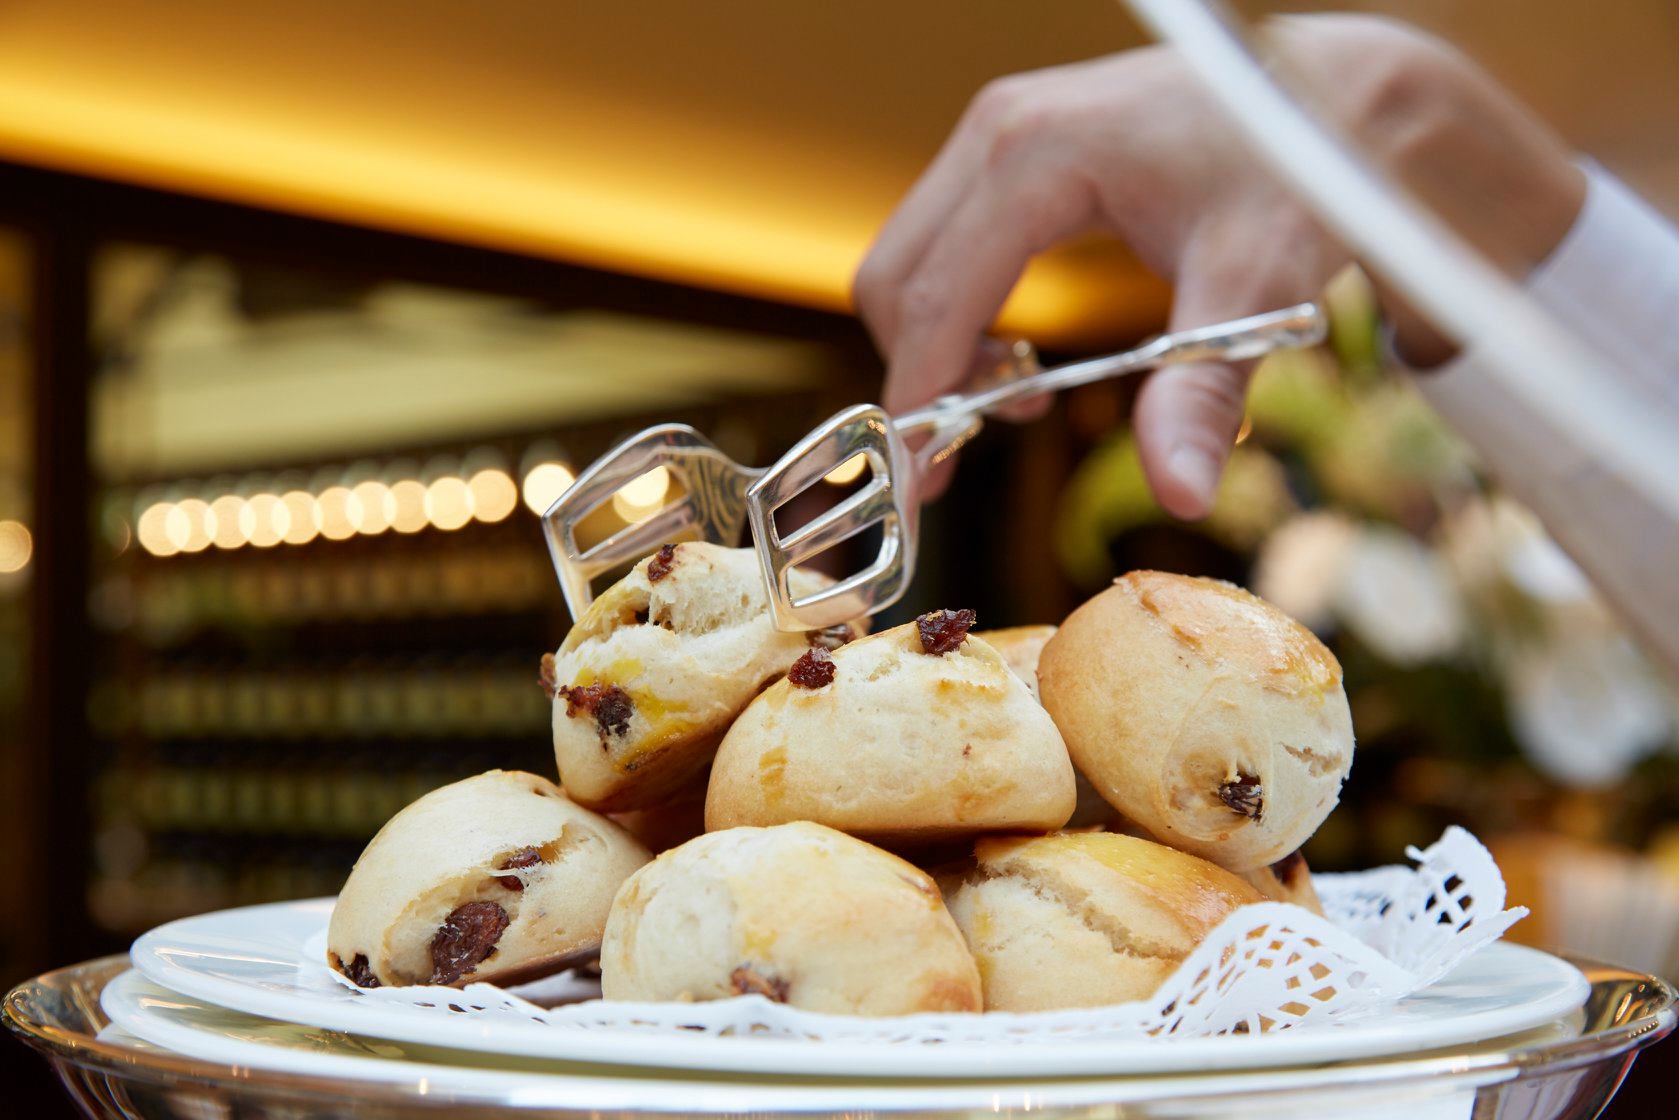 Pair TWG Tea delectable scones with TWG Tea-infused jellies flavoured exclusively with TWG Tea's most popular blends. Experience your tea time at TWG Tea Salons!